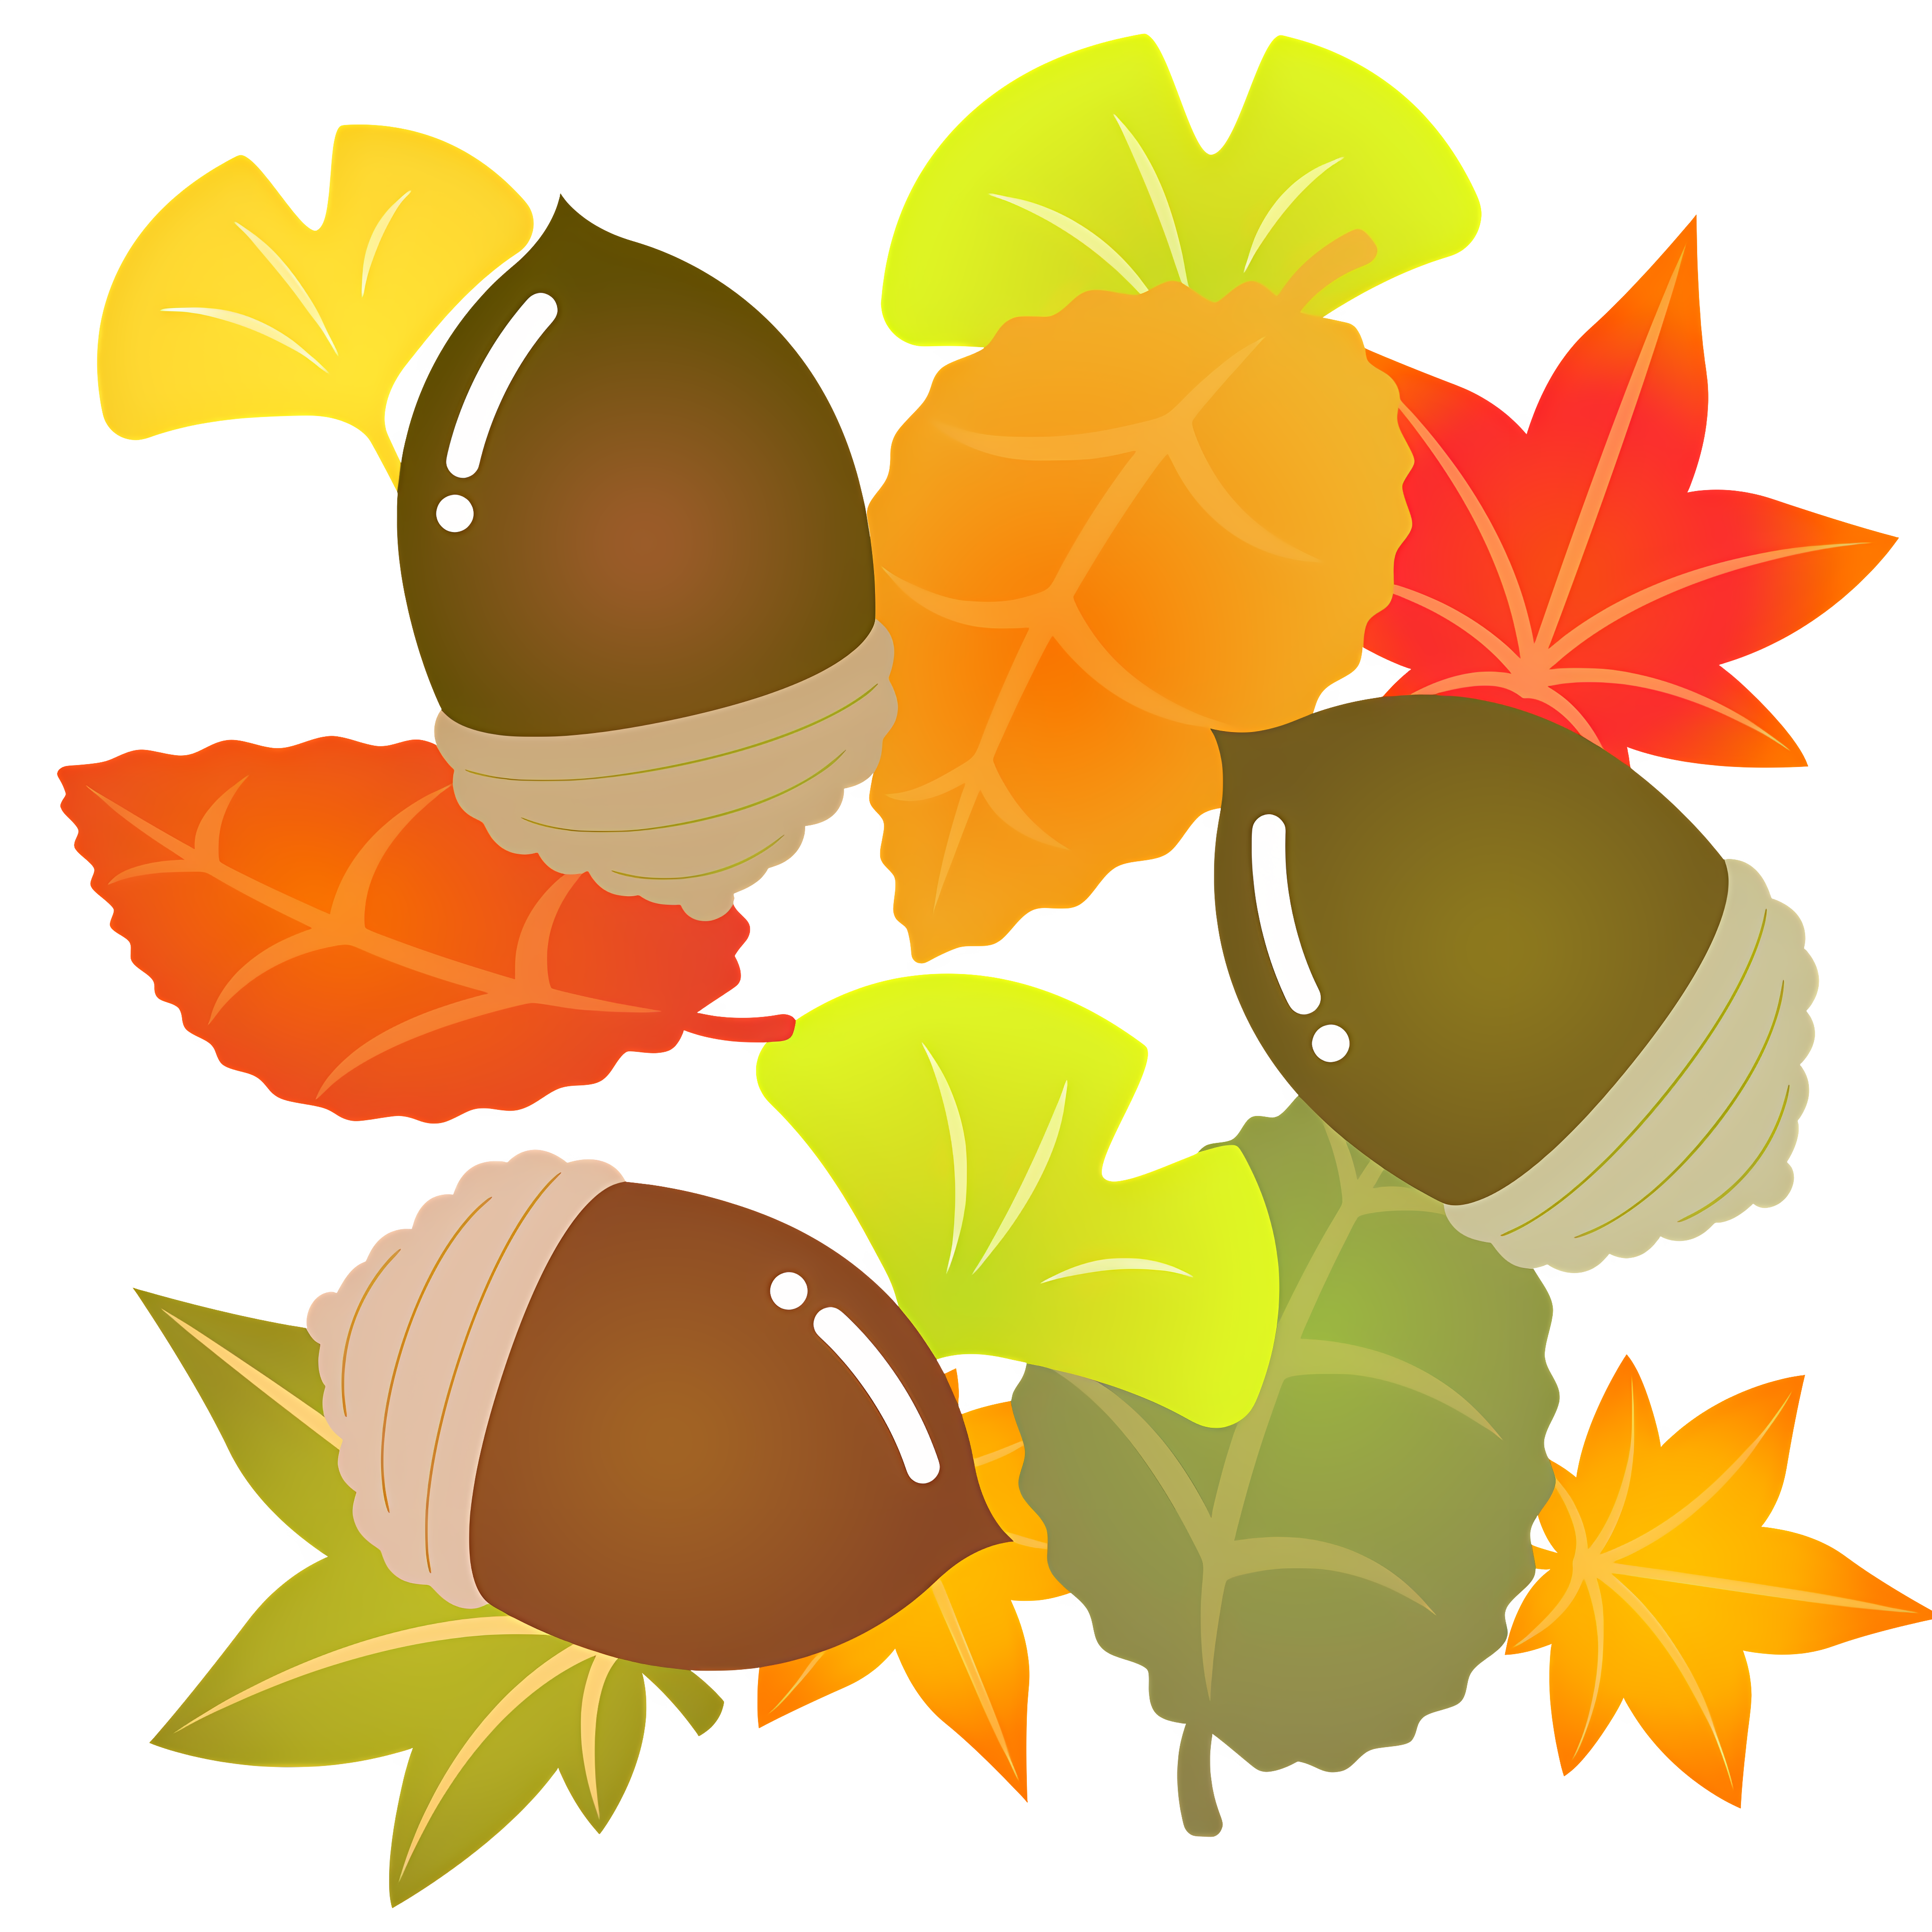 Autumn leaves and acorns arranged in circular pattern Clipart